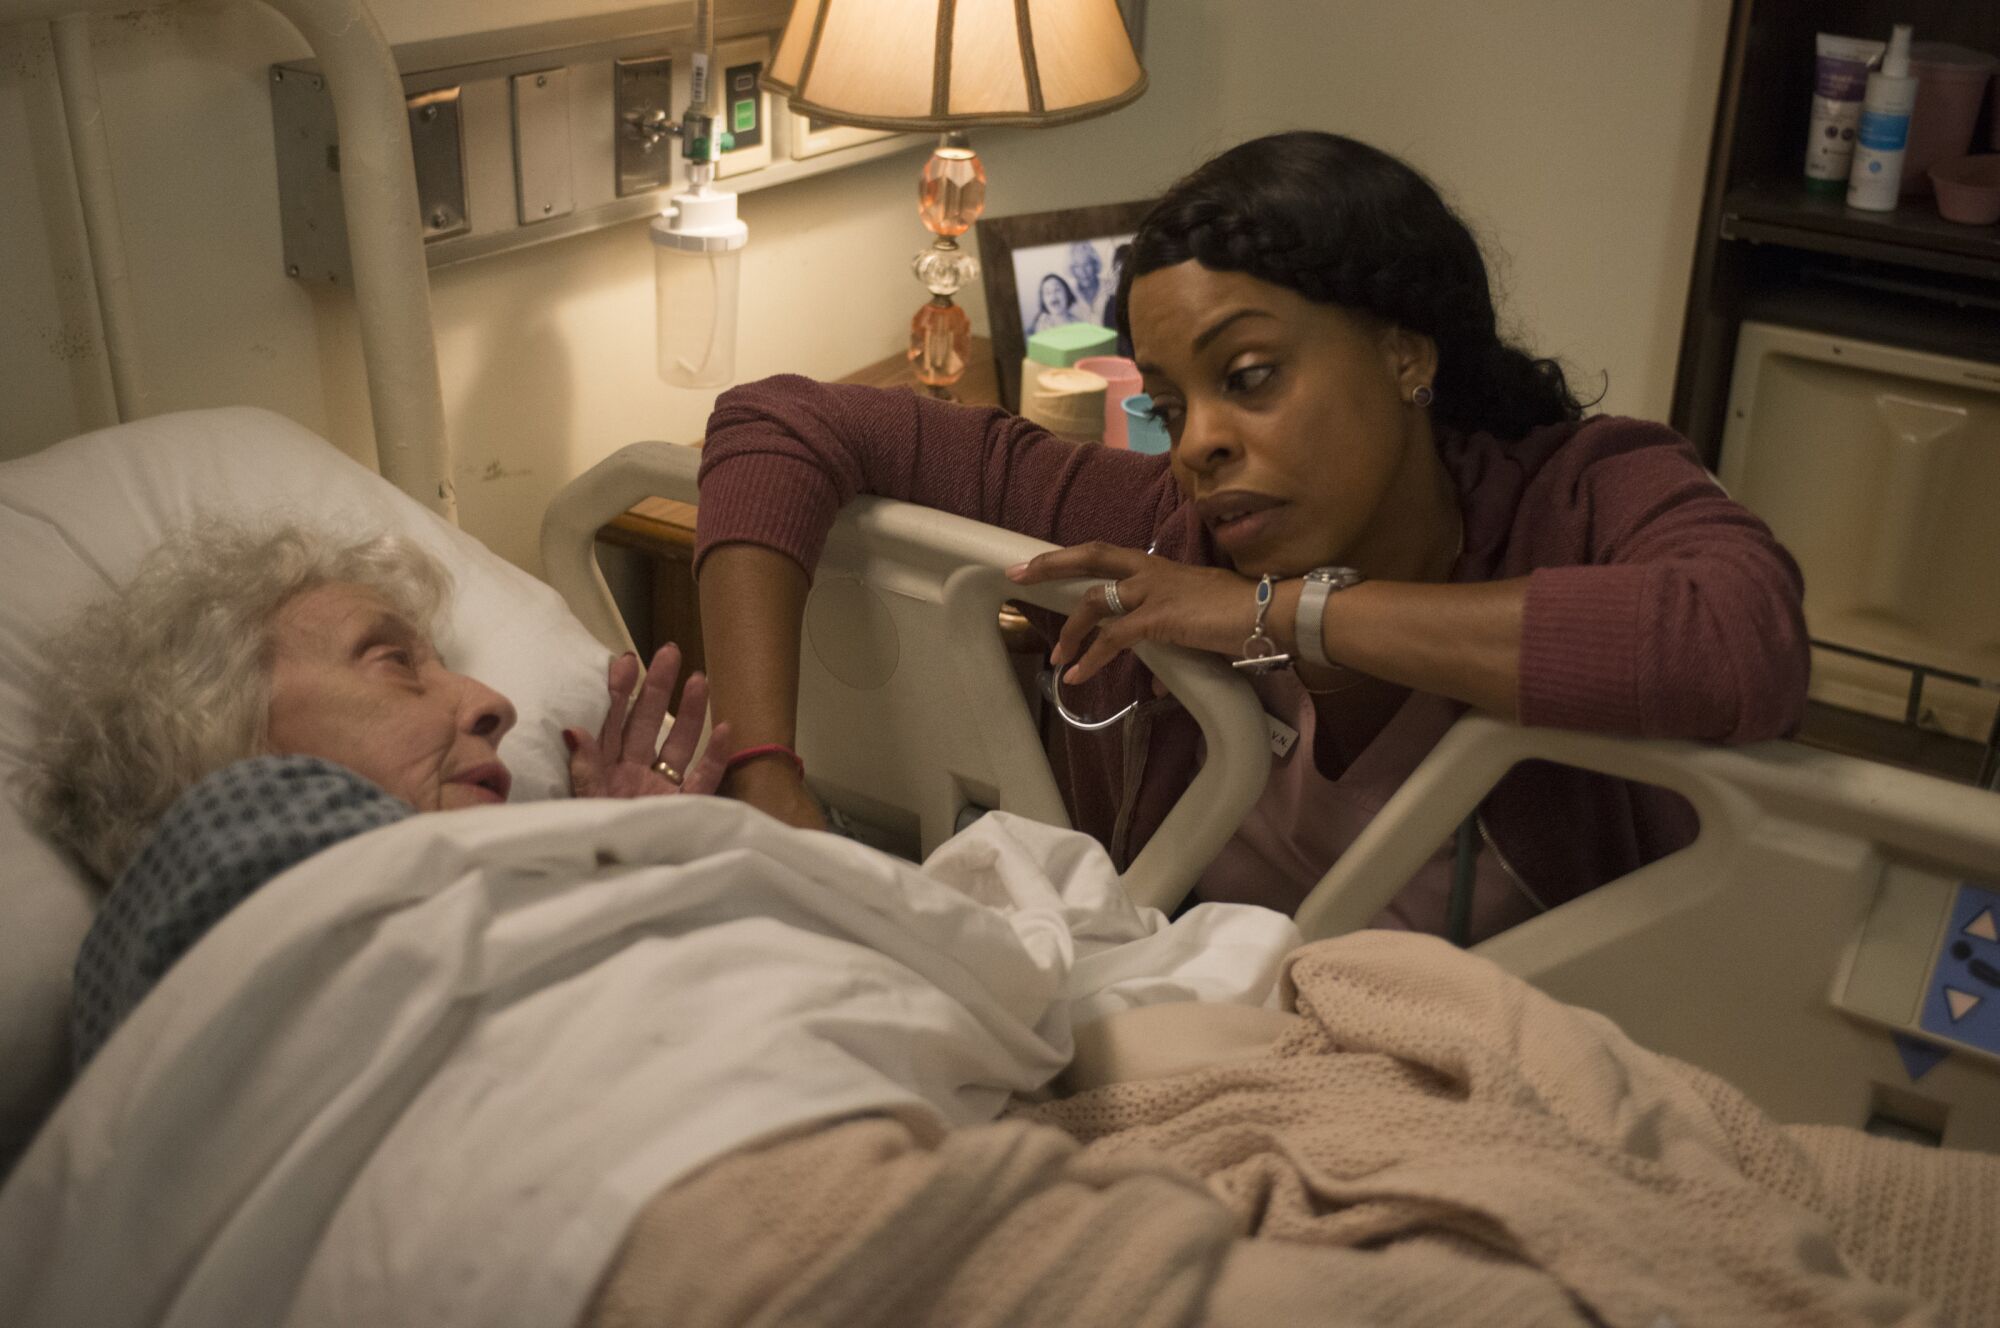 Ann Guilbert, left, with Niecy Nash in "Getting On."